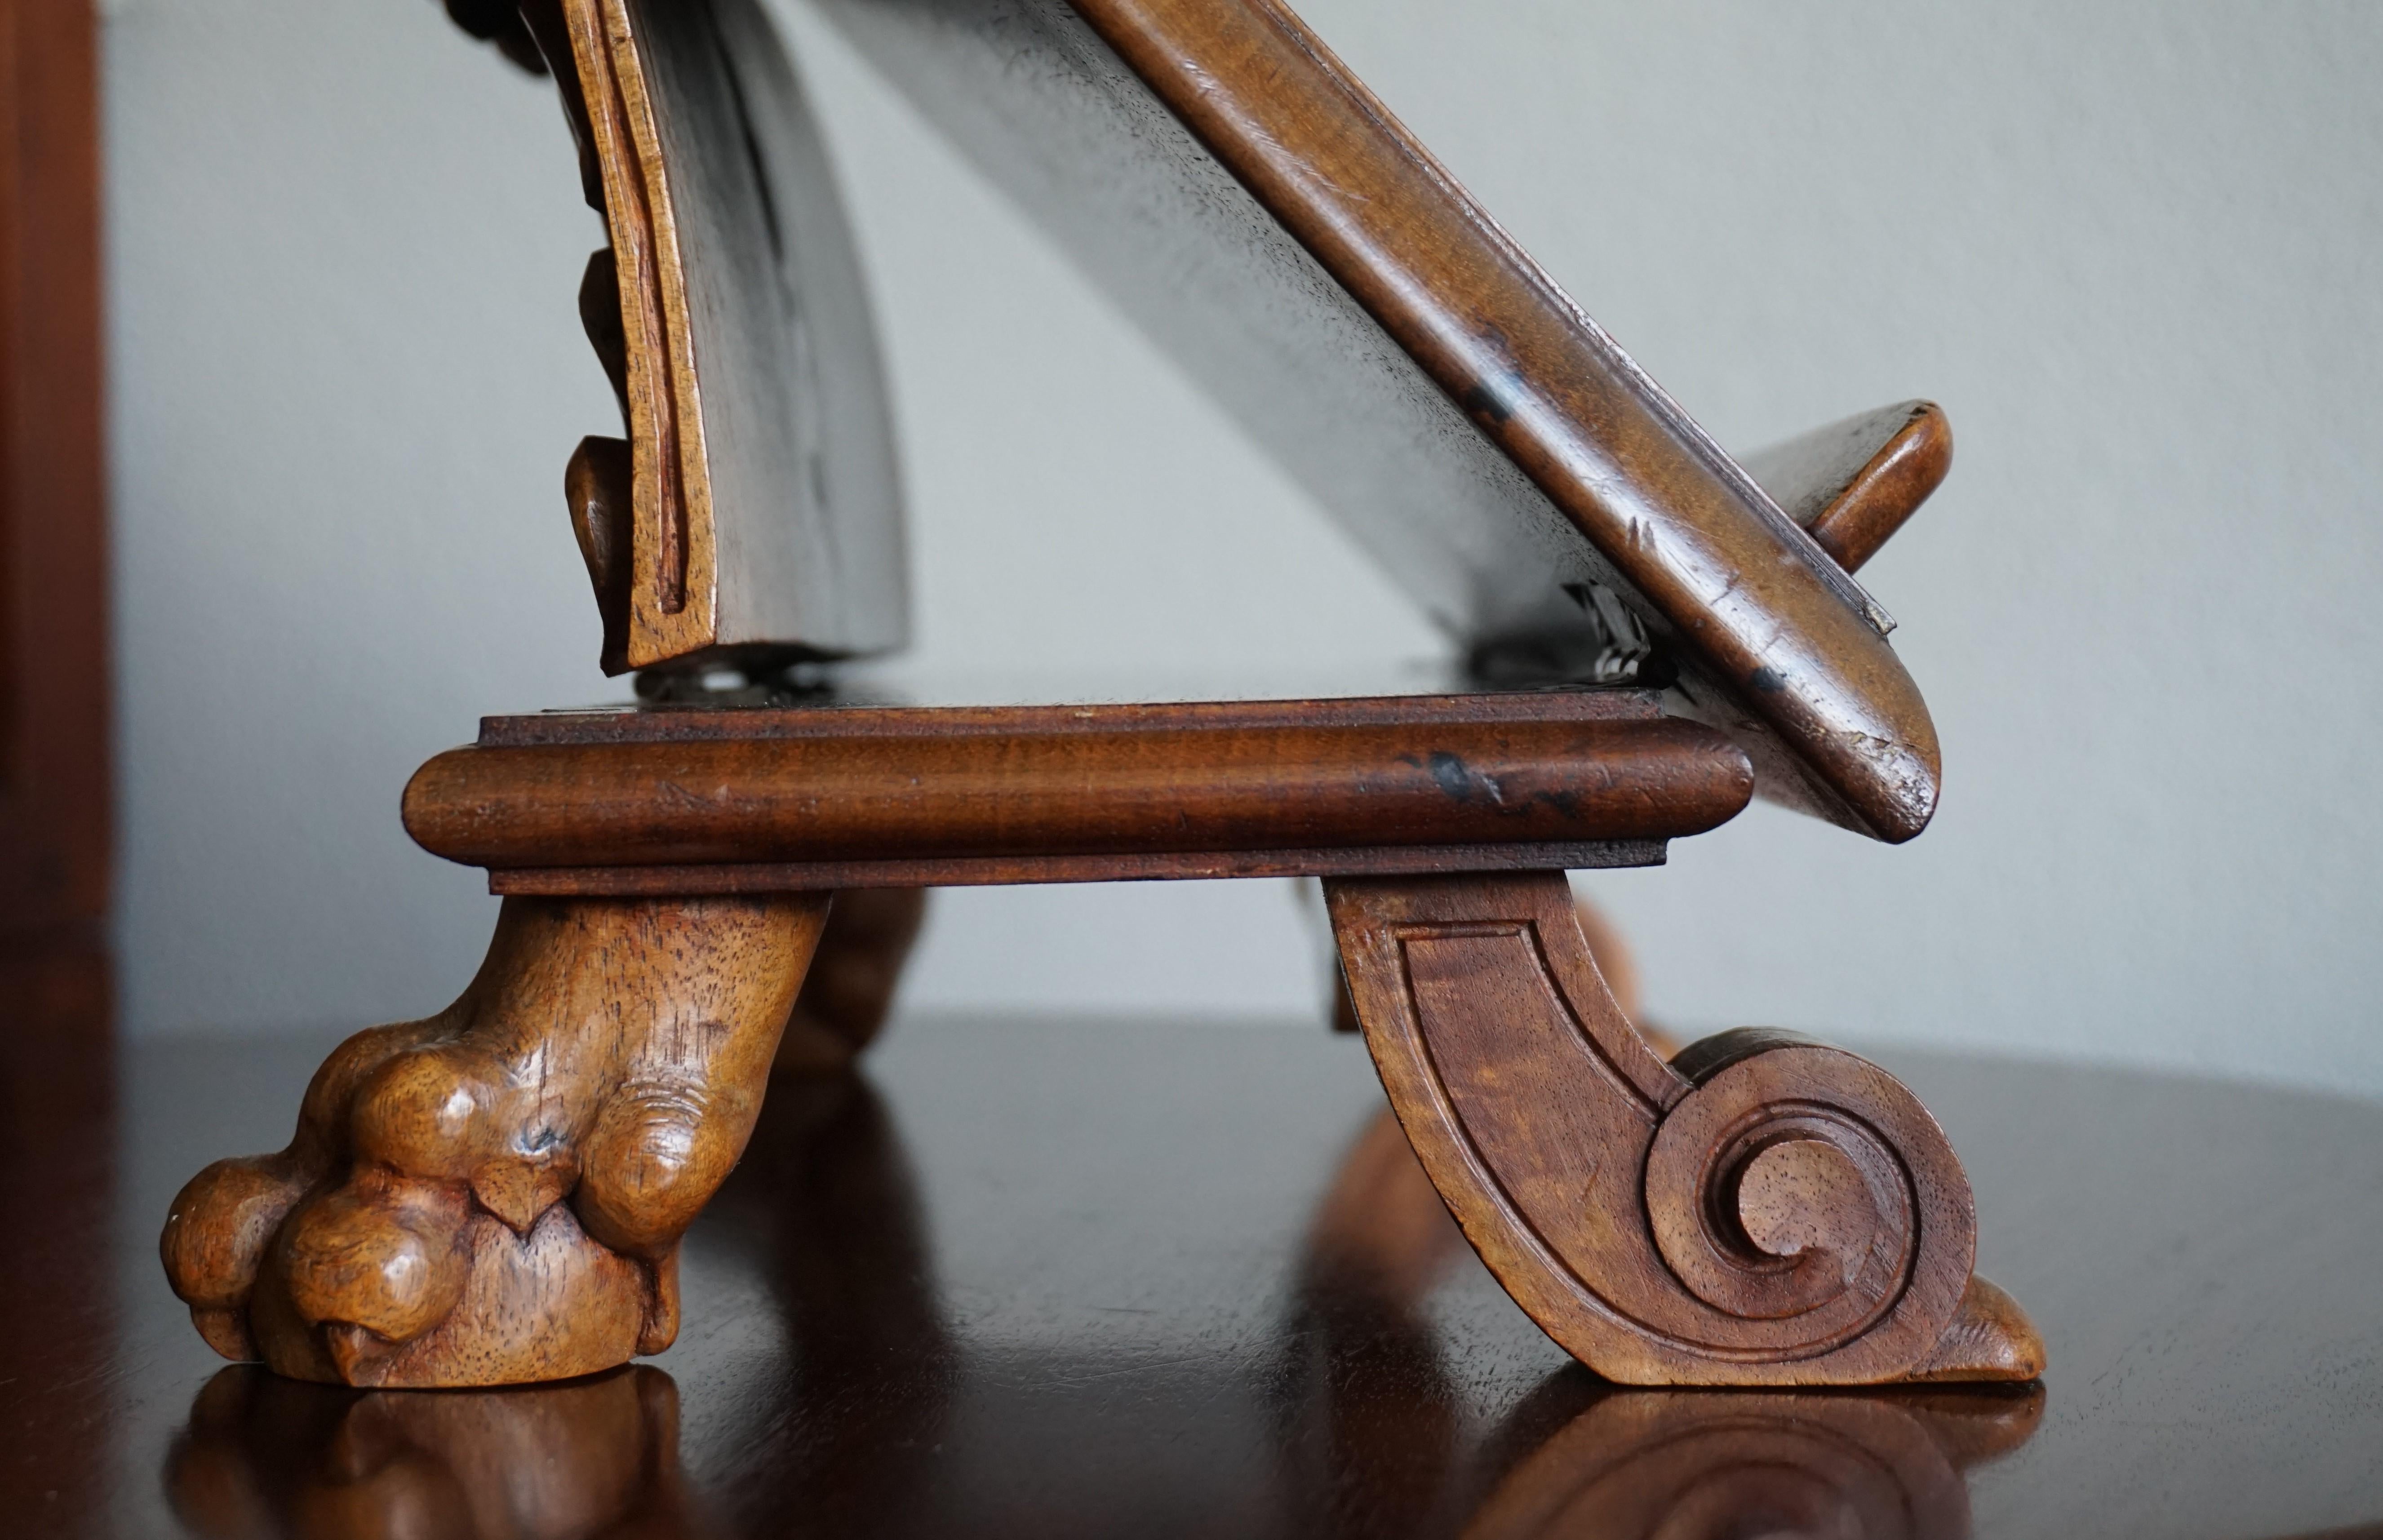 Antique & Unique Adjustable Bookstand with Hand Carved Leaf Pattern & Claw Feet 1